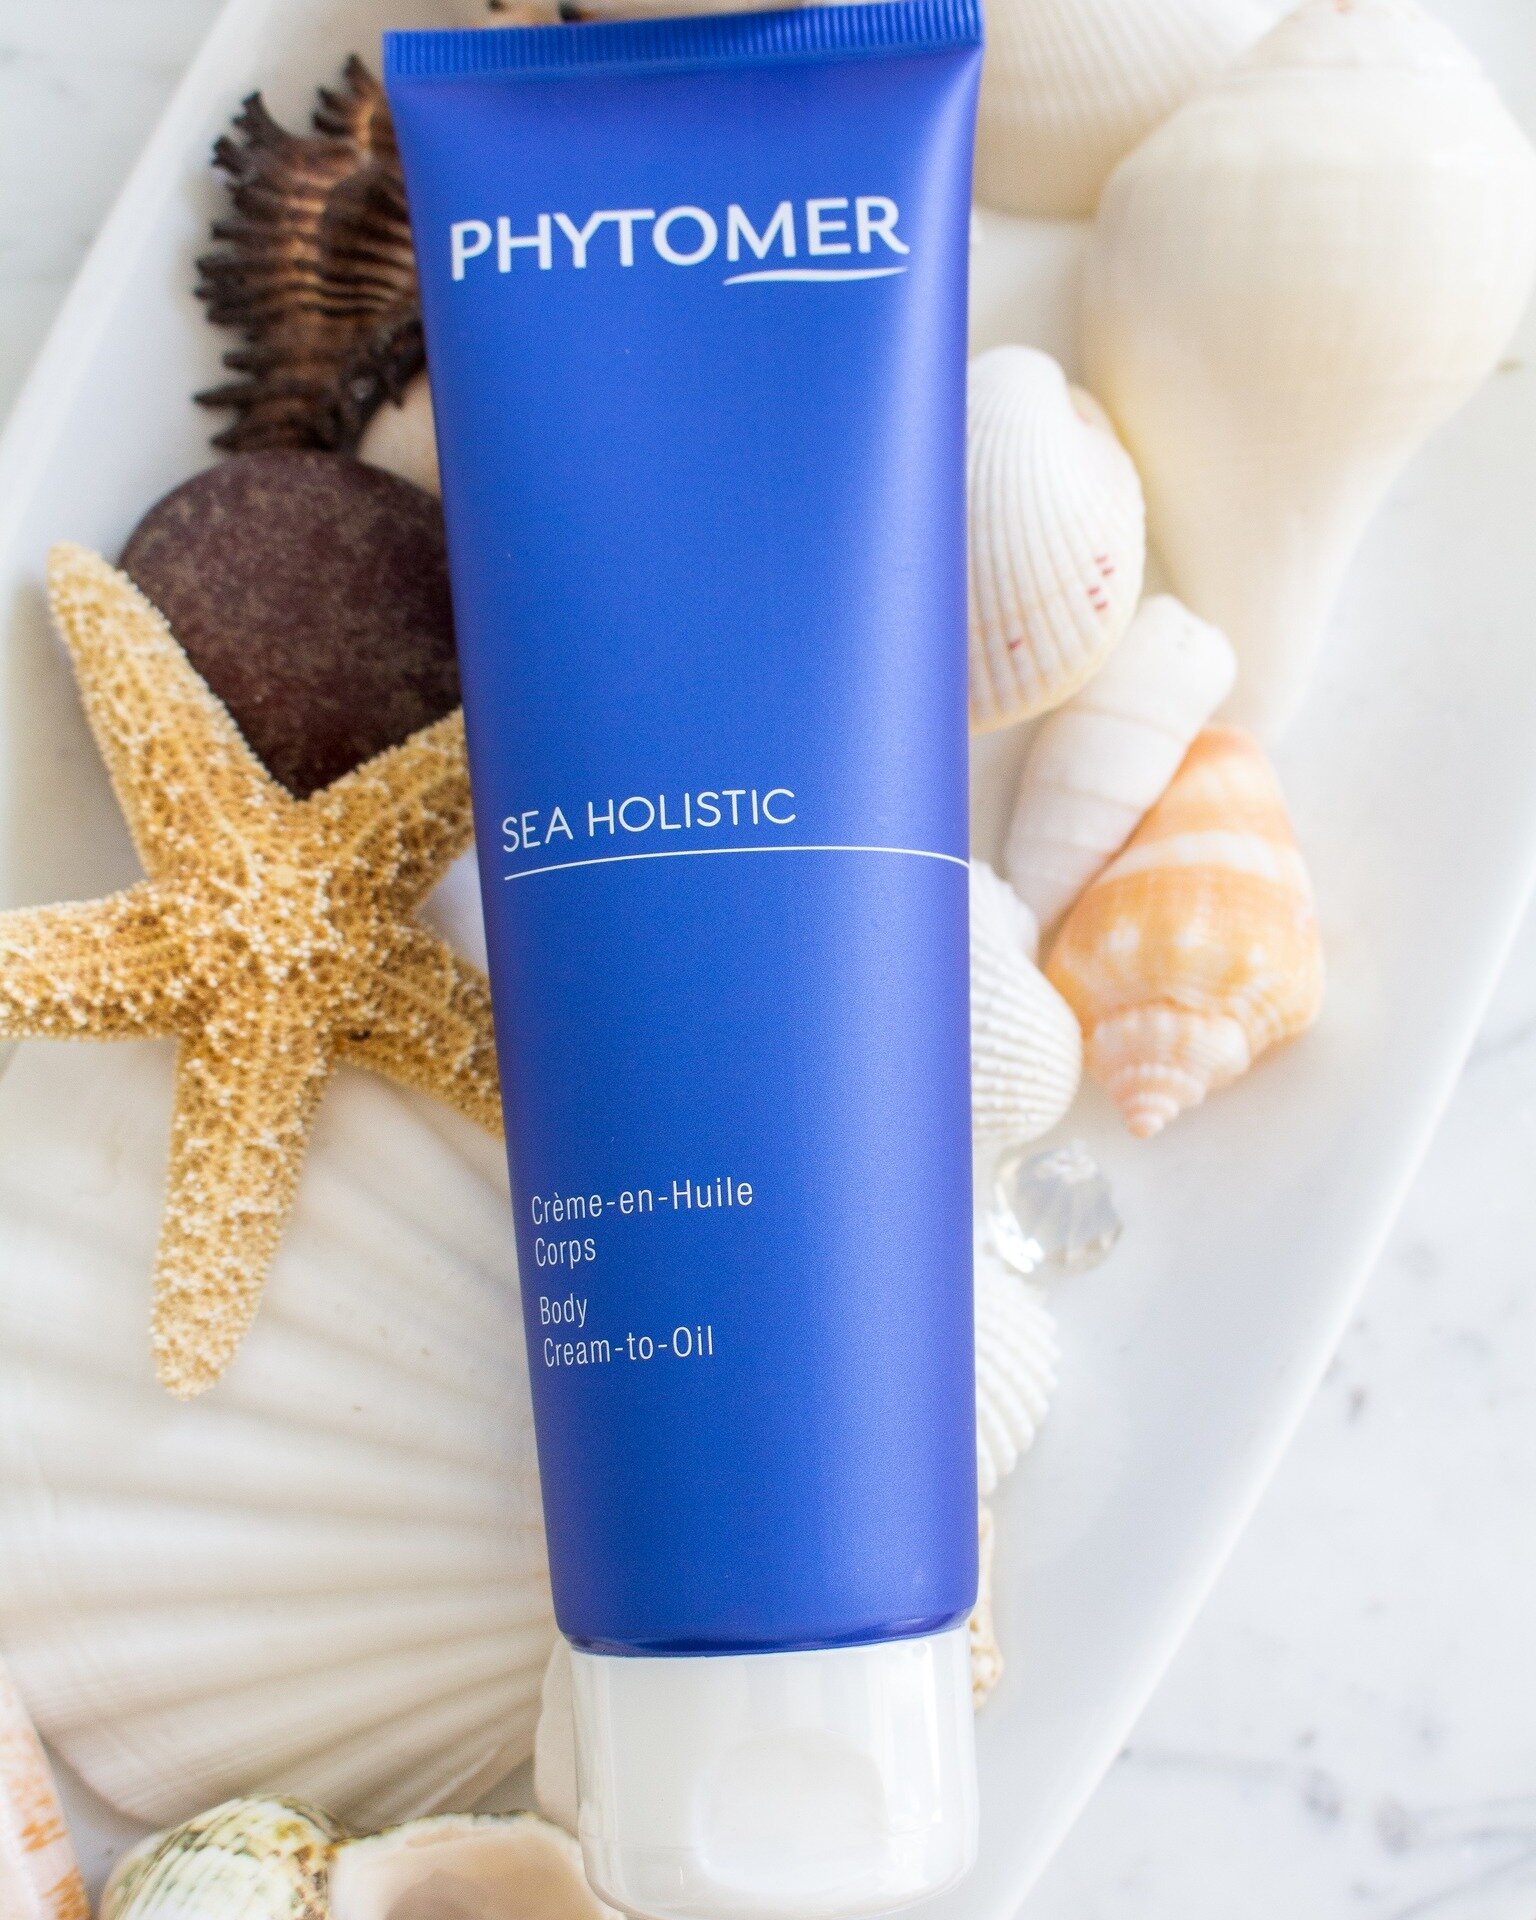 Experience heightened well-being when you drench your skin in one of our favorite moisturizers, Sea Holistic Body Cream. This rich and generous moisturizer melts onto the skin and transforms into a nourishing light oil with a soft and satiny ﬁnish.

